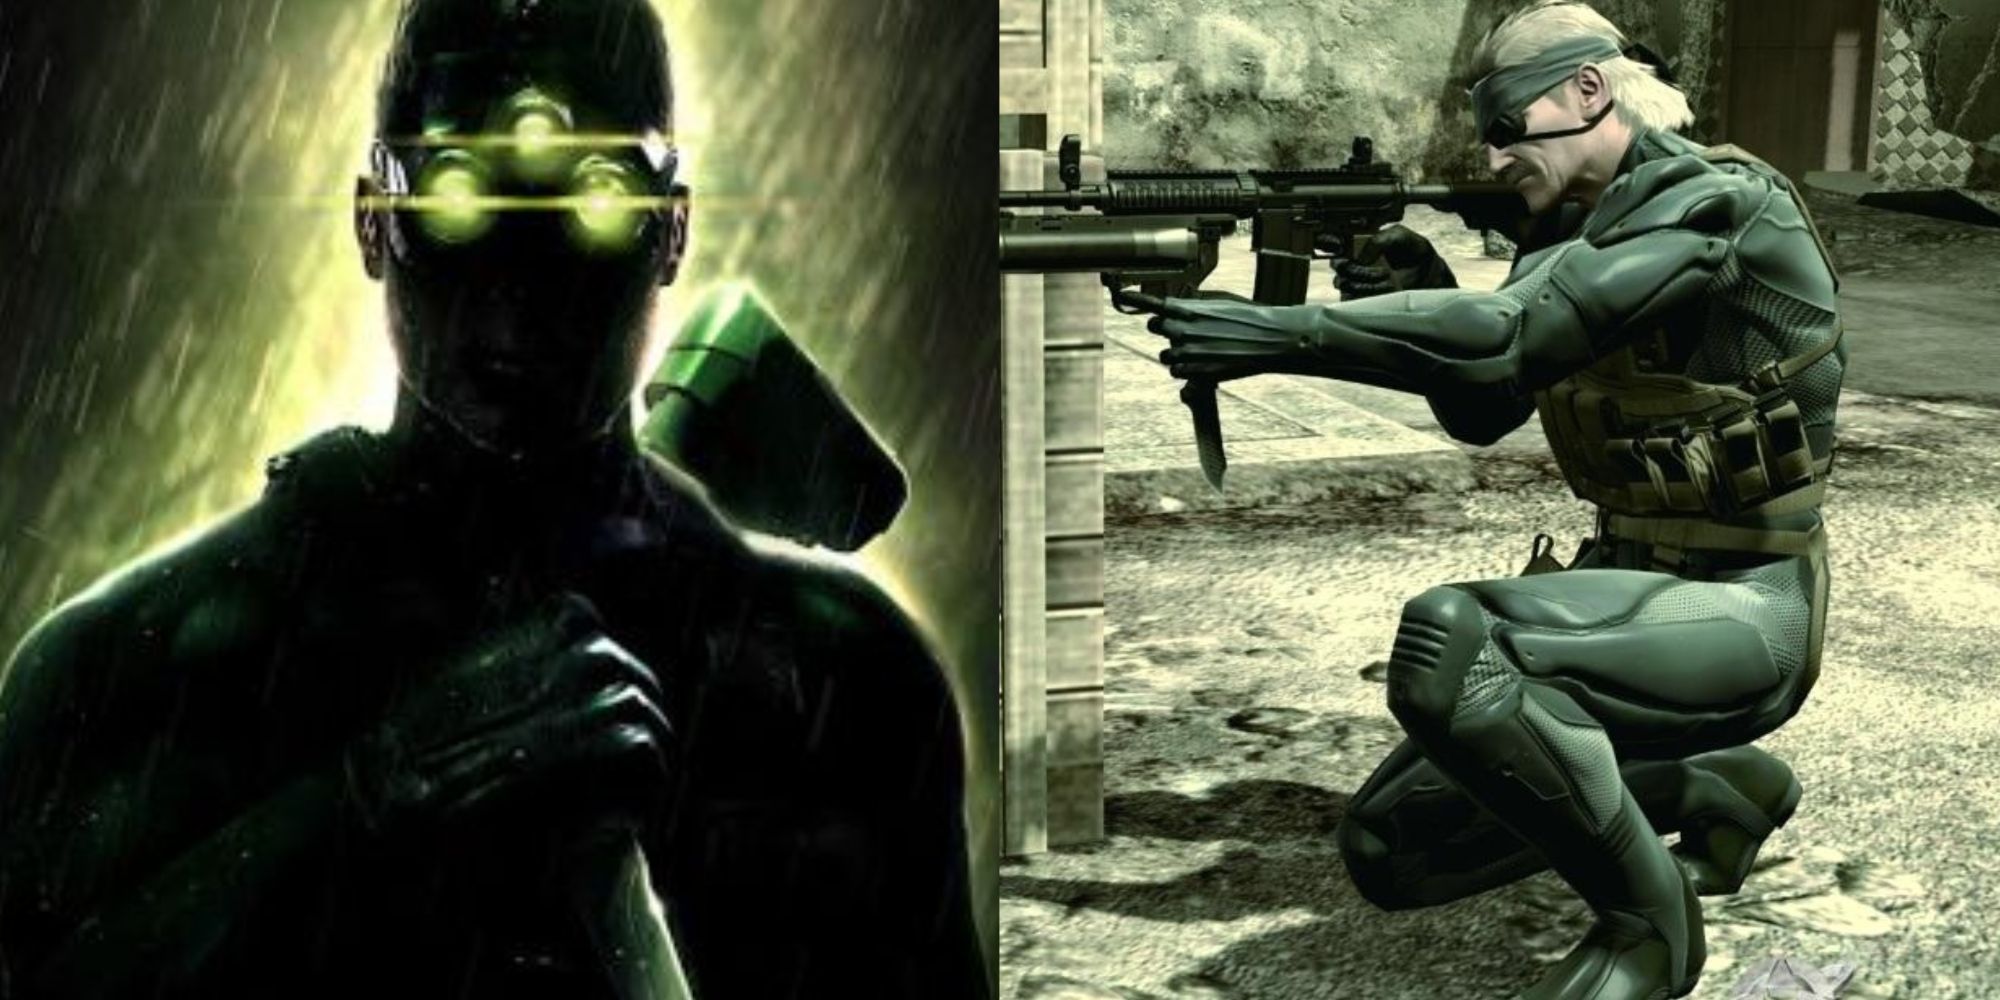 Split images of a dark figure in Splinter Cell 2 and Snake shooting in Metal Gear Solid 4